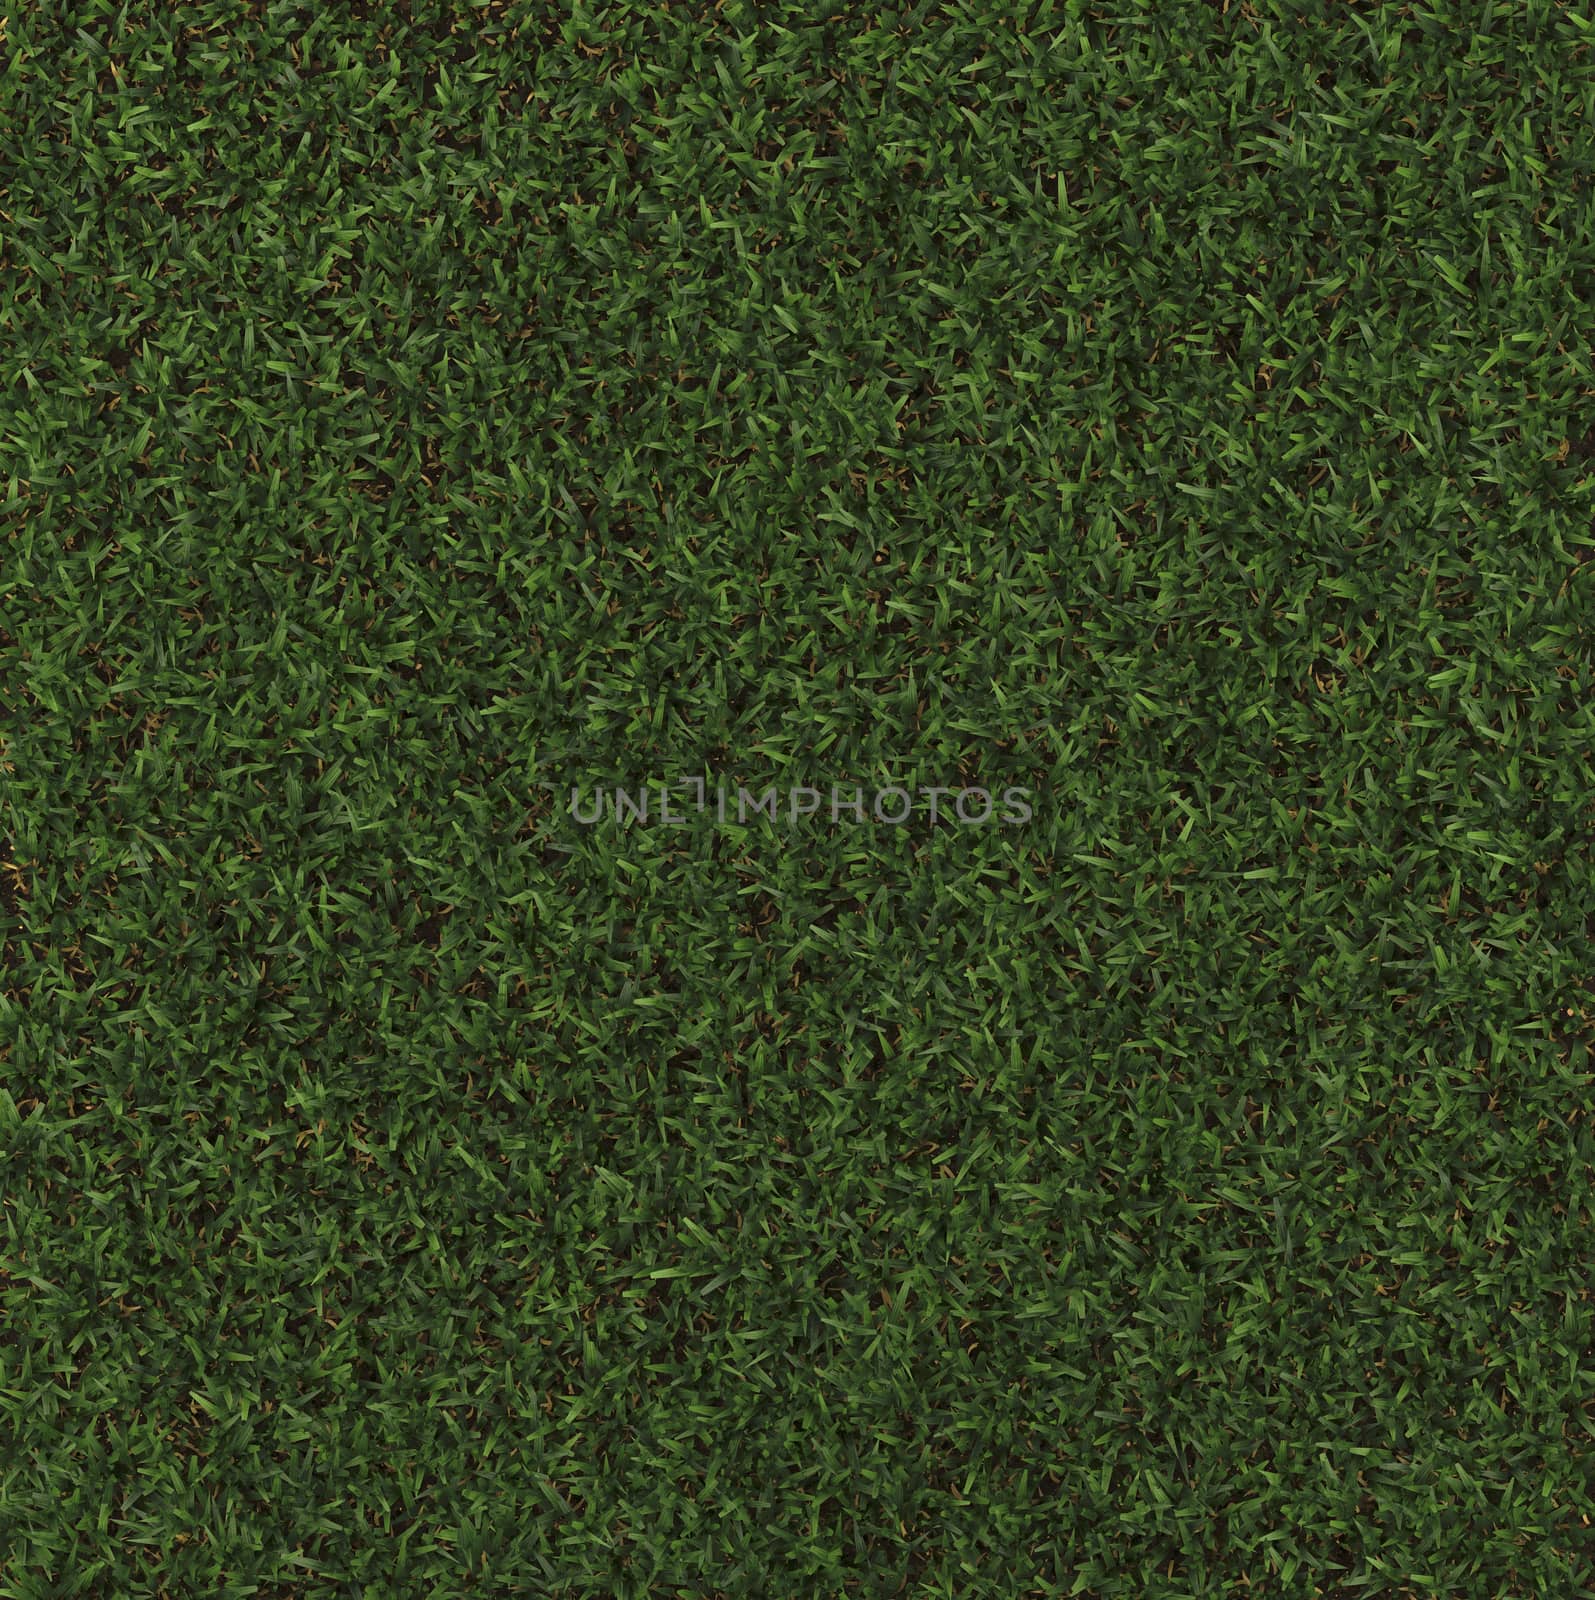 Perfect Grass  made in 3d software